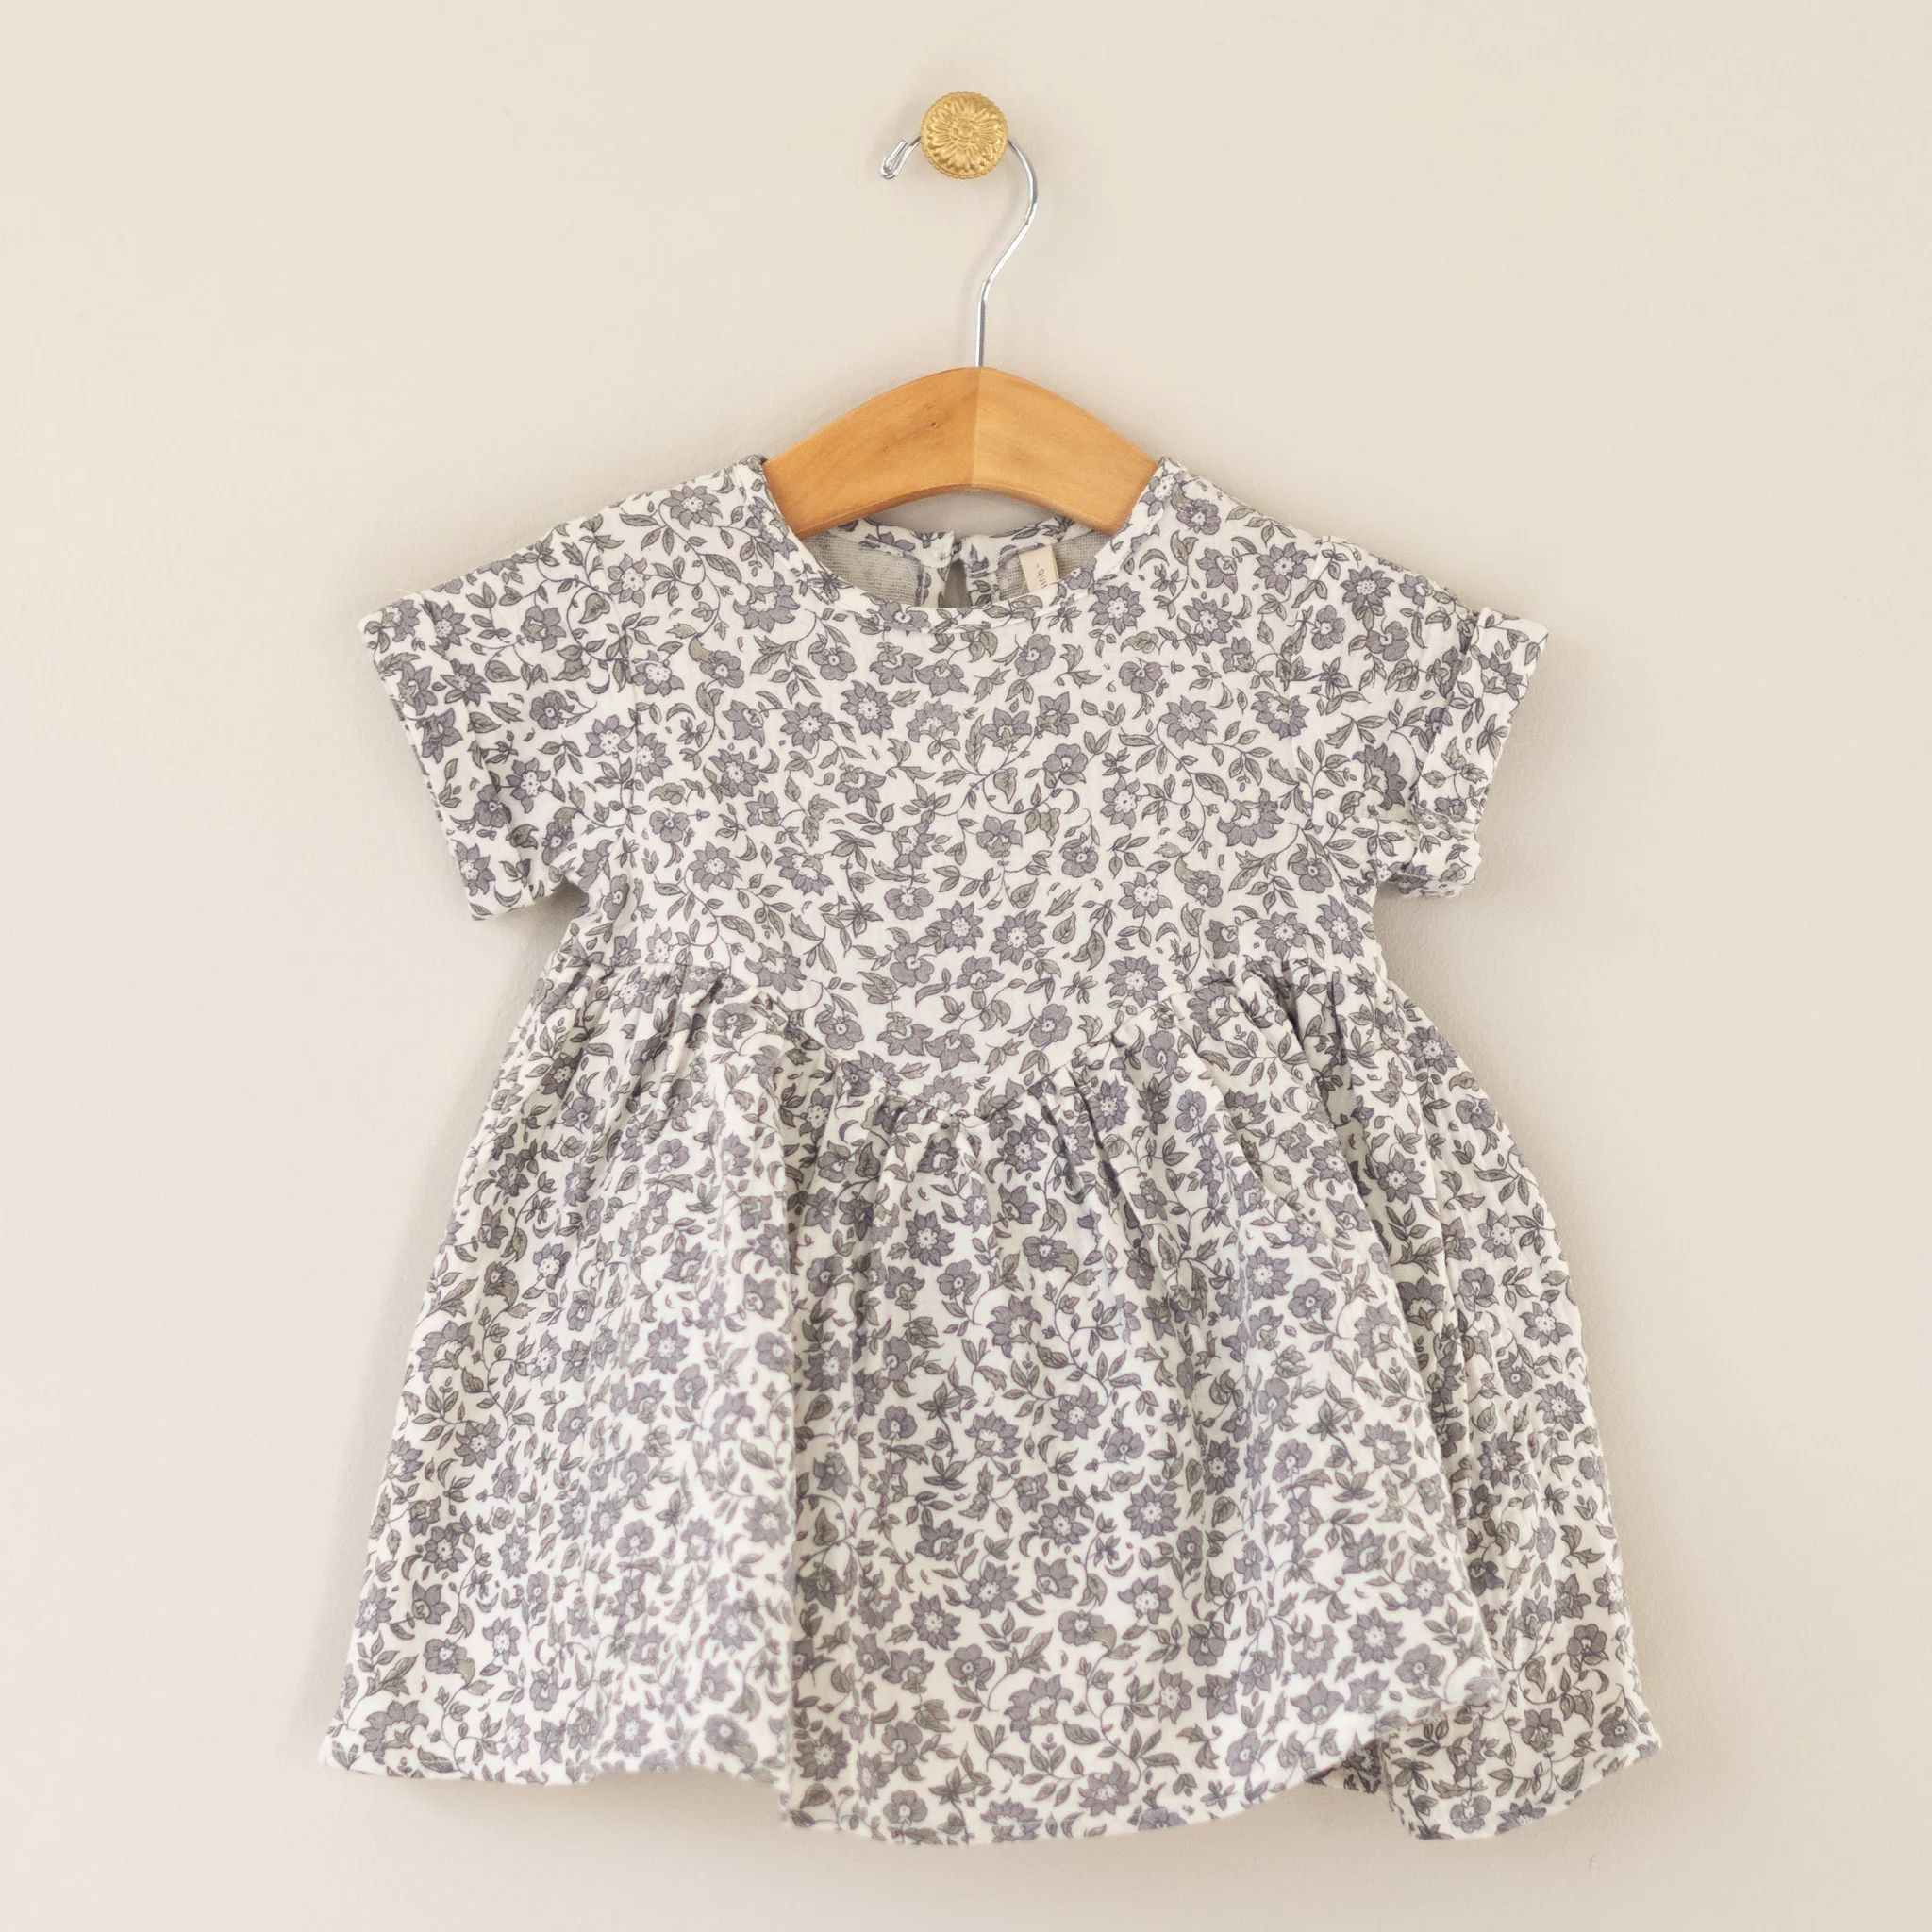 Quincy Mae Brielle French Garden Dress | Four and Twenty Sailors